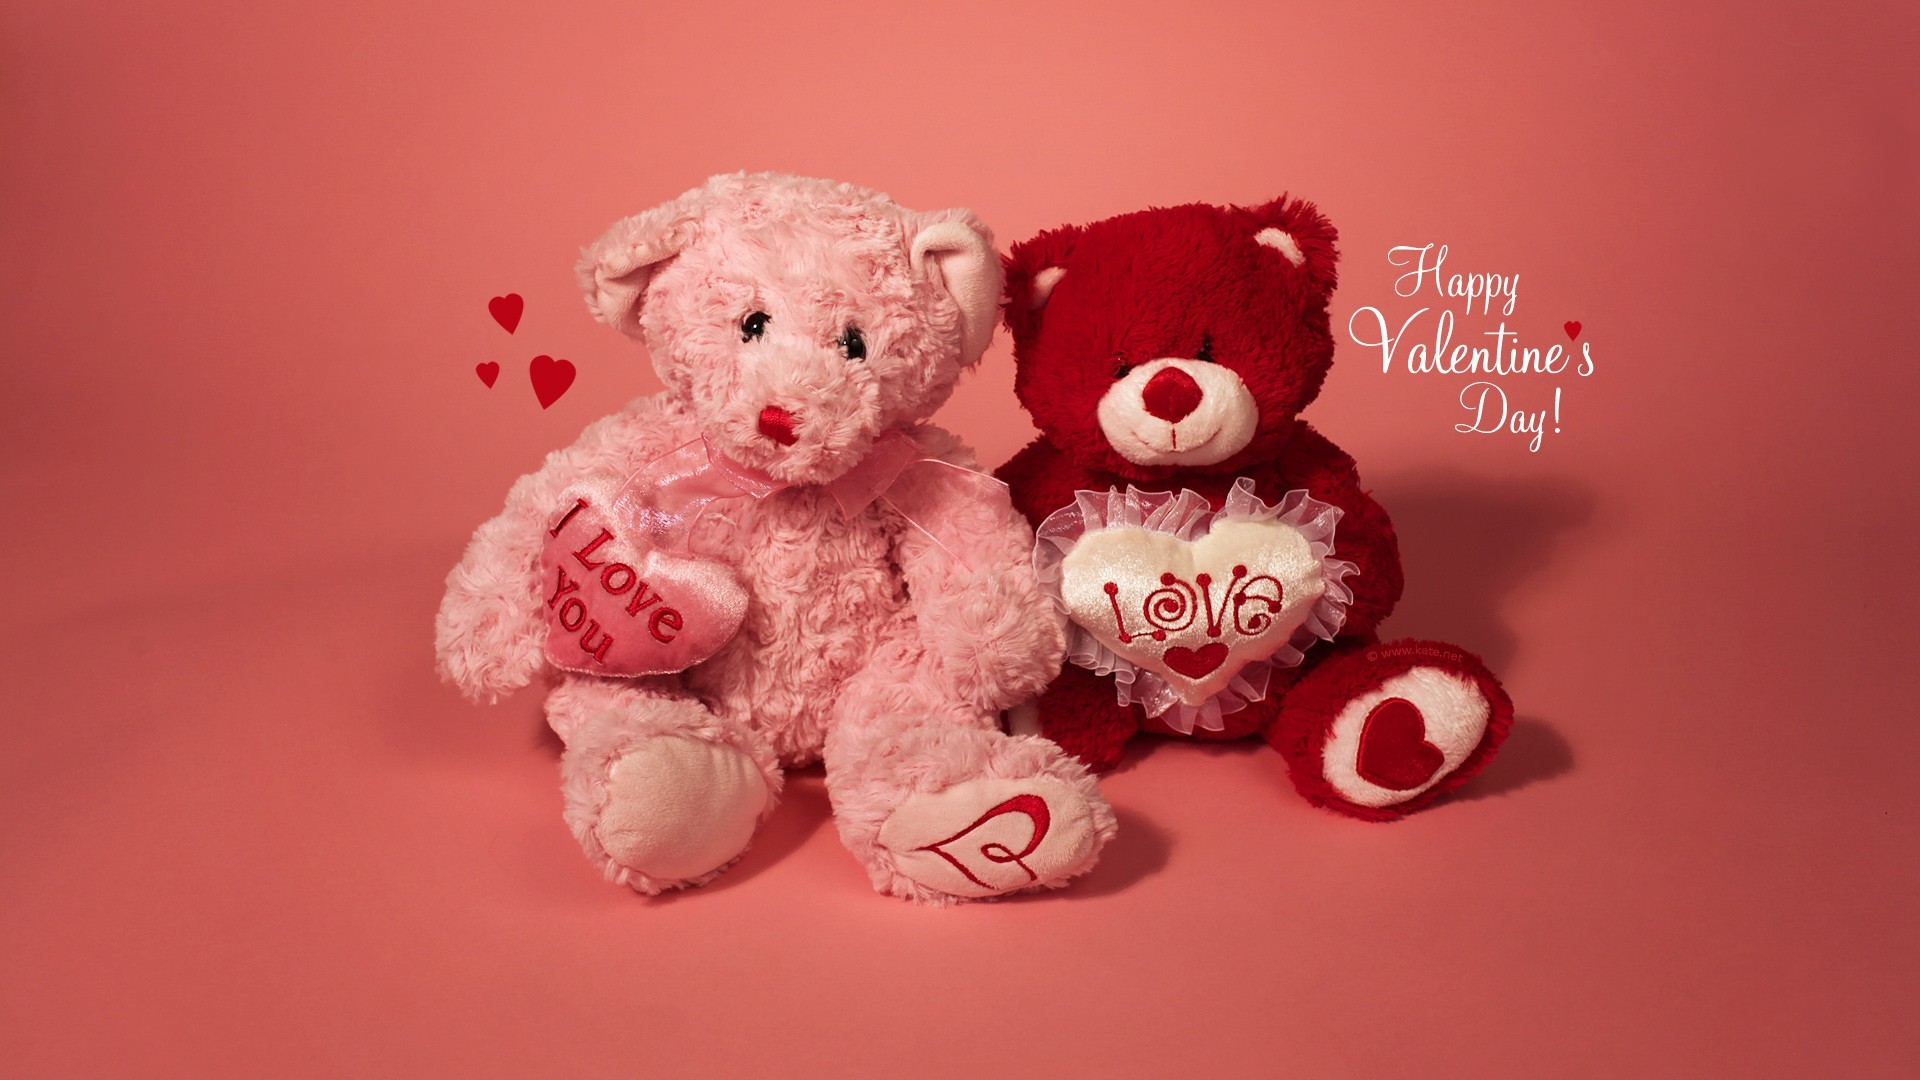 1920x1080 Cute Valentines Day Wallpaper For Desktop For Pc desktop ,Mobiles iphone  and android devices